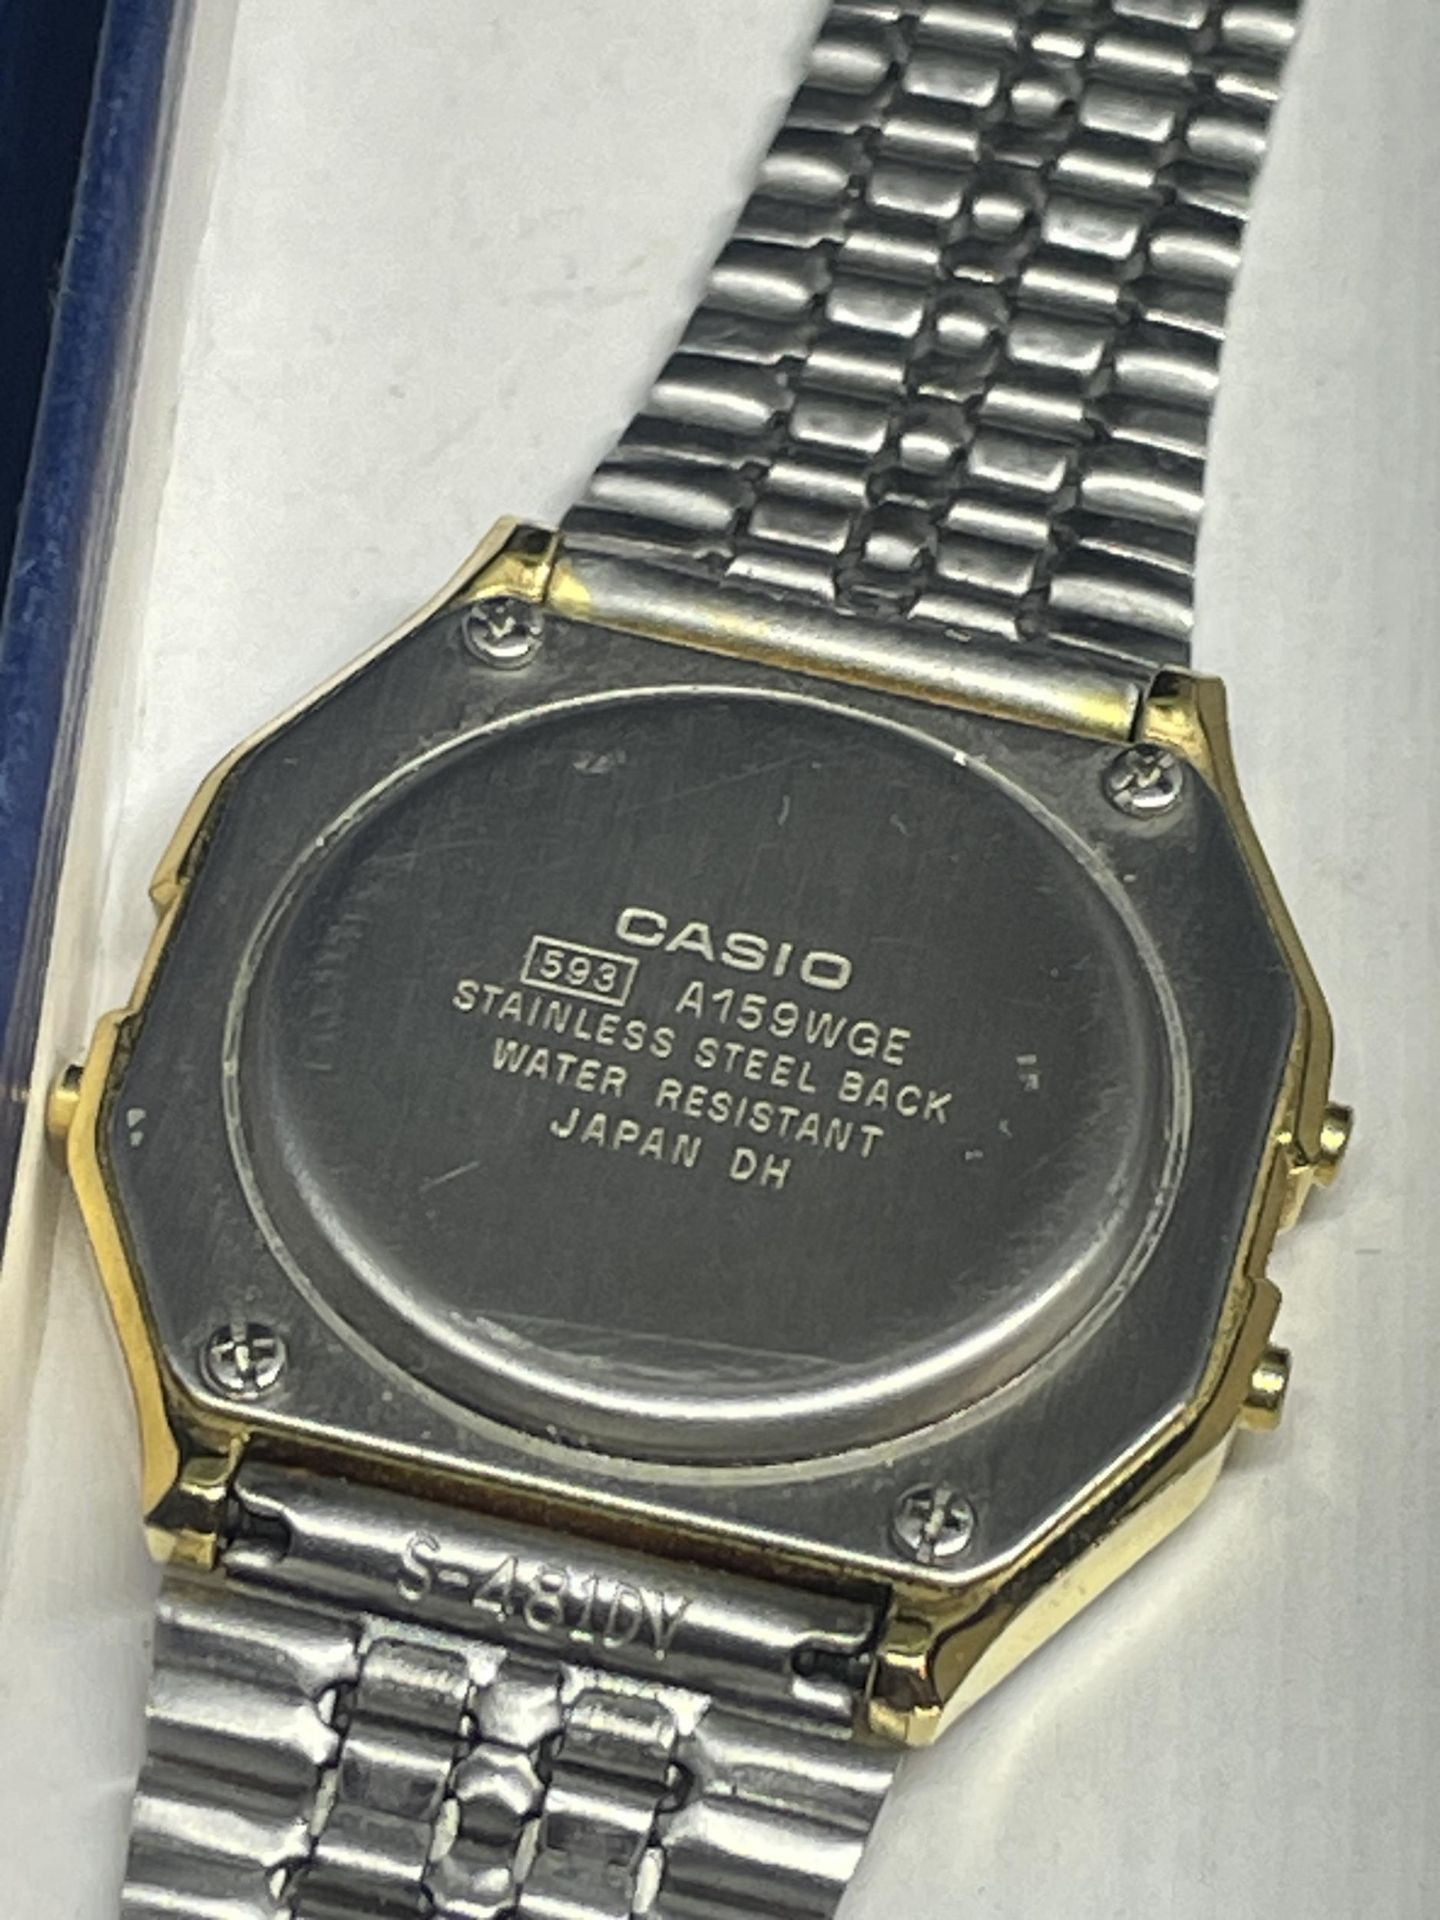 A VINTAGE CASIO DIGITAL YELLOW METAL WRIST WATCH SEEN WORKING BUT NO WARRANTY GIVEN - Image 3 of 3